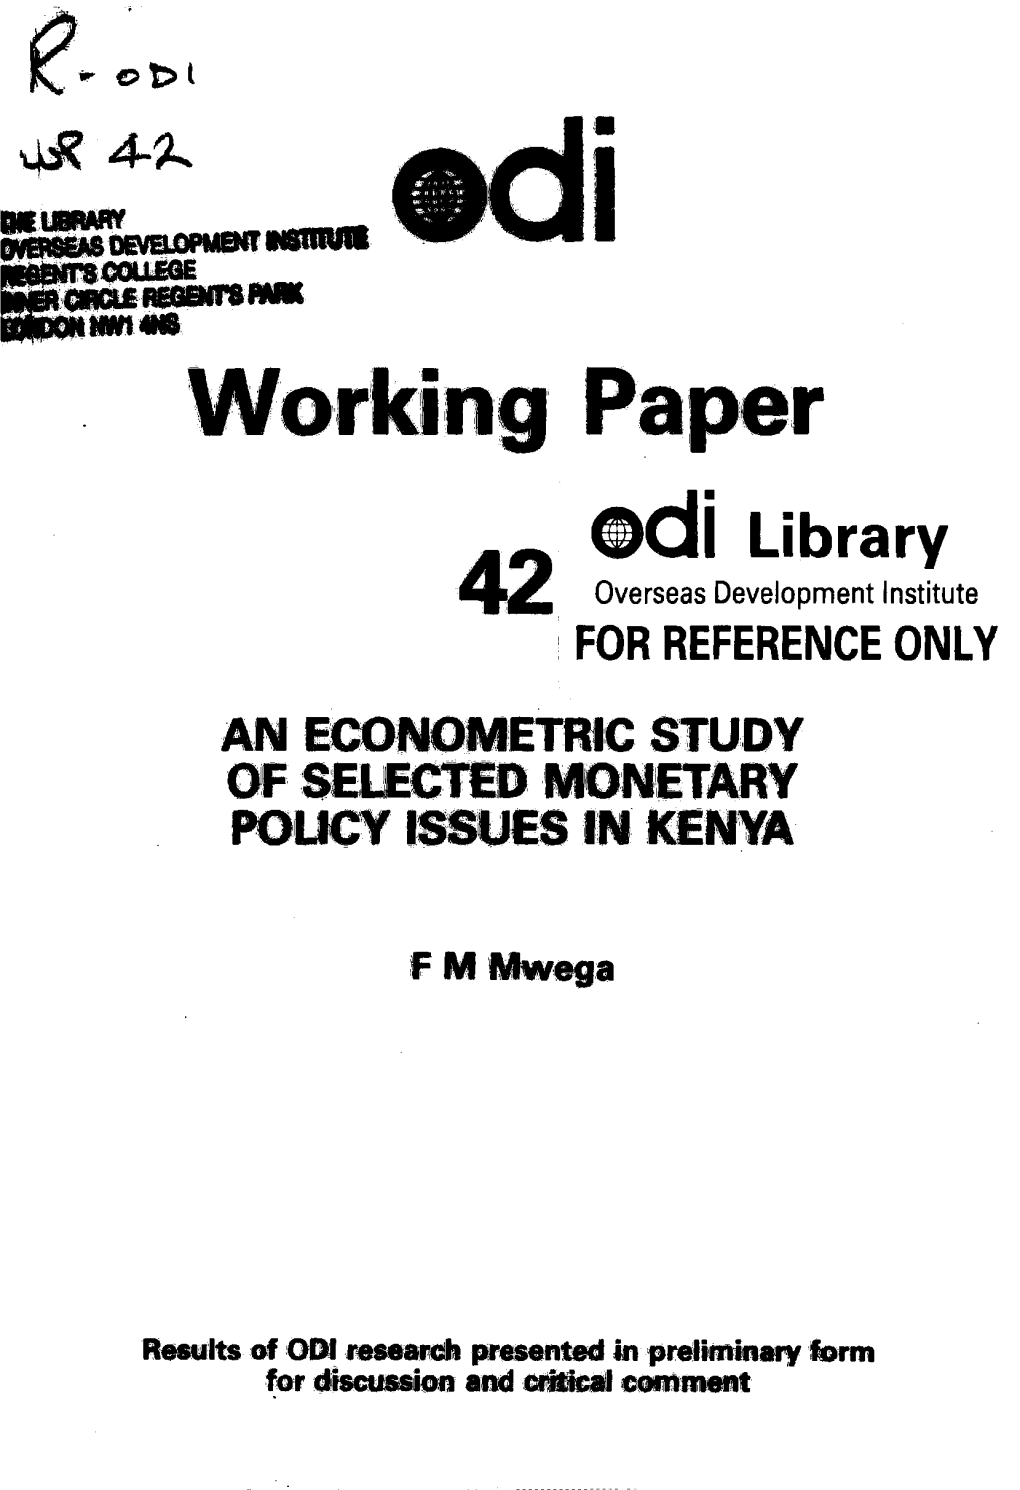 An Econometric Study of Selected Monetary Policy Issues in Kenya